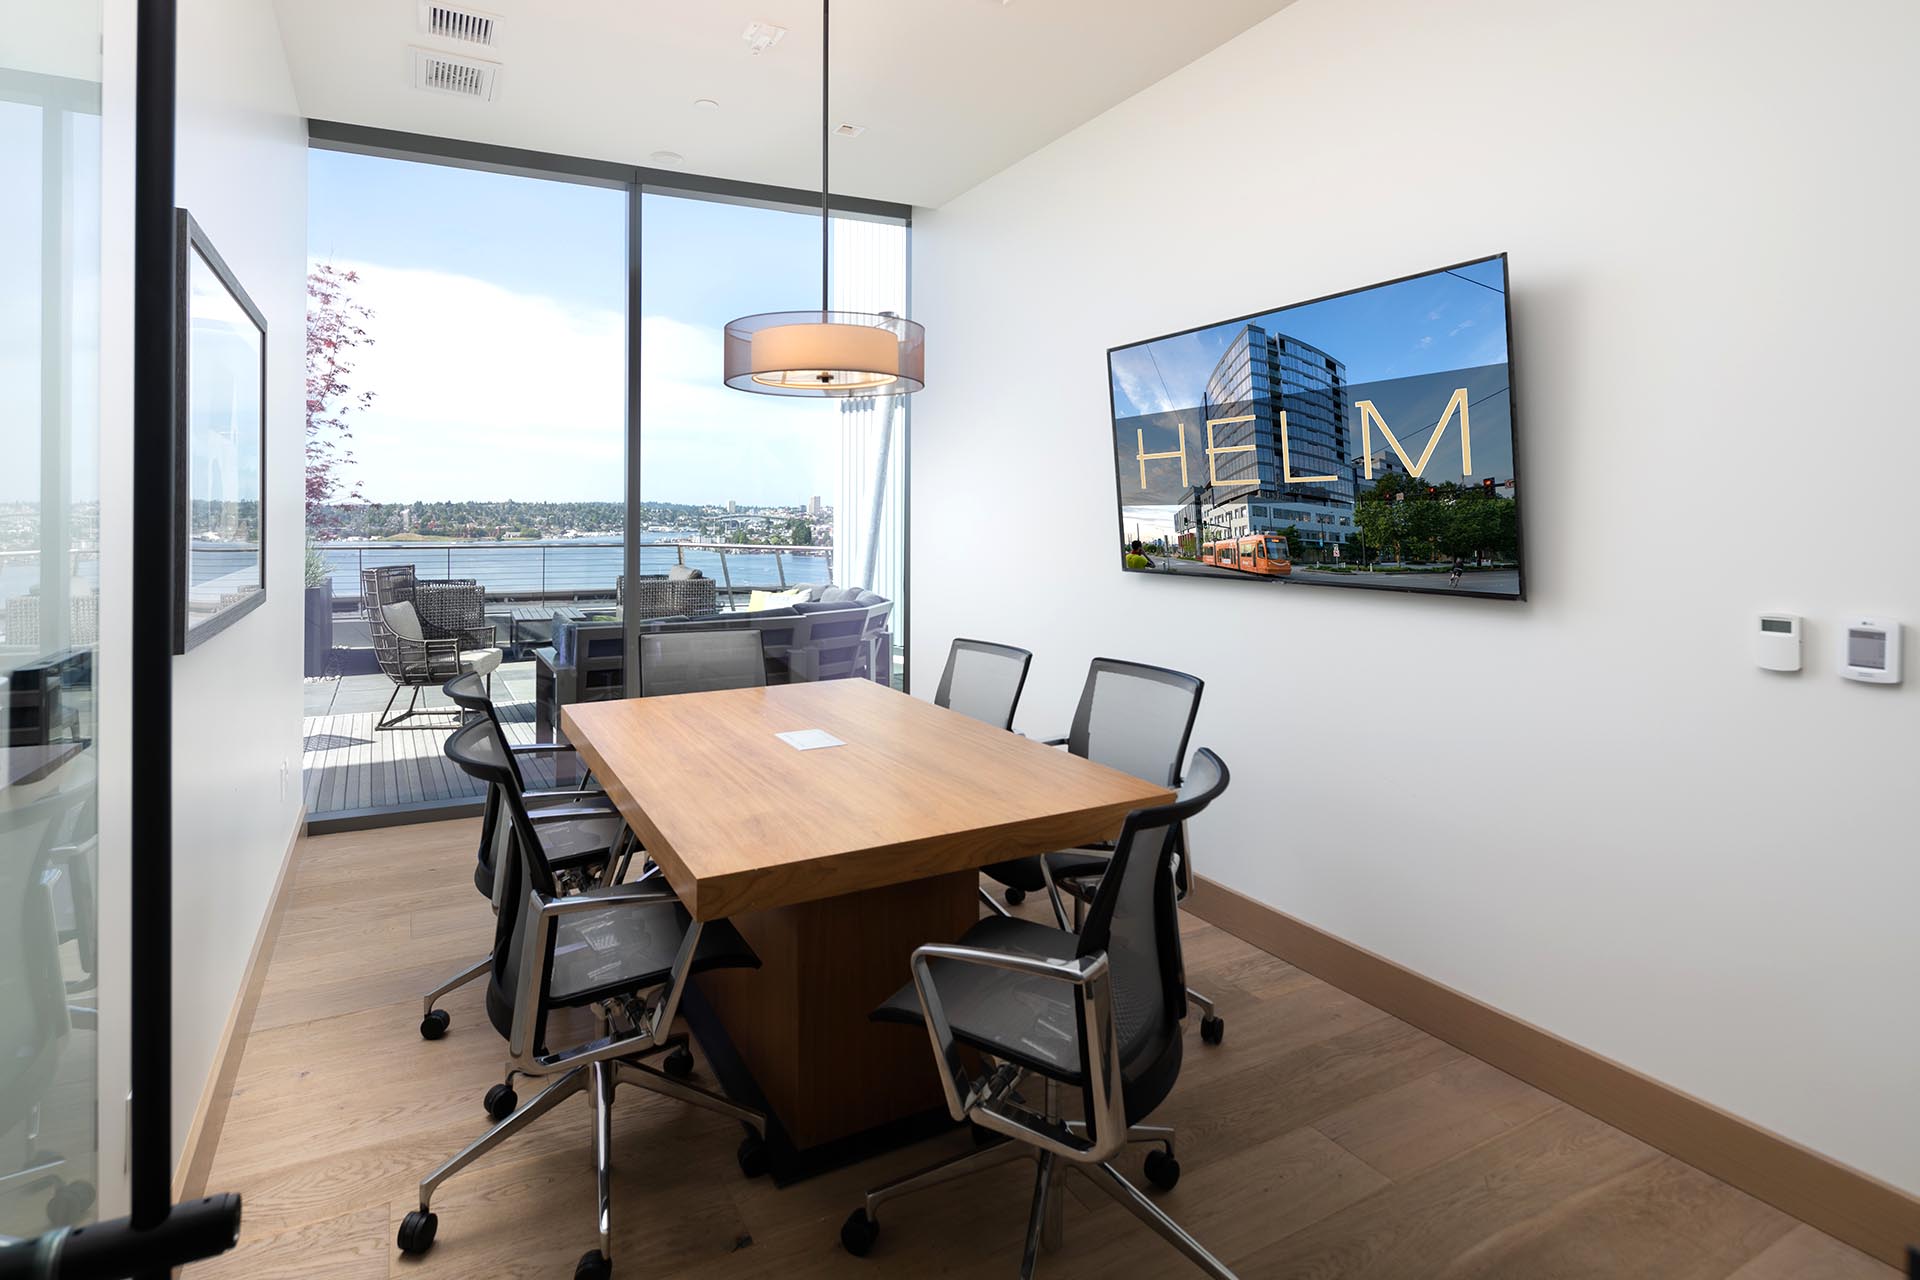 A small, well lit office space with a wall of glass and the city/lake in view from within